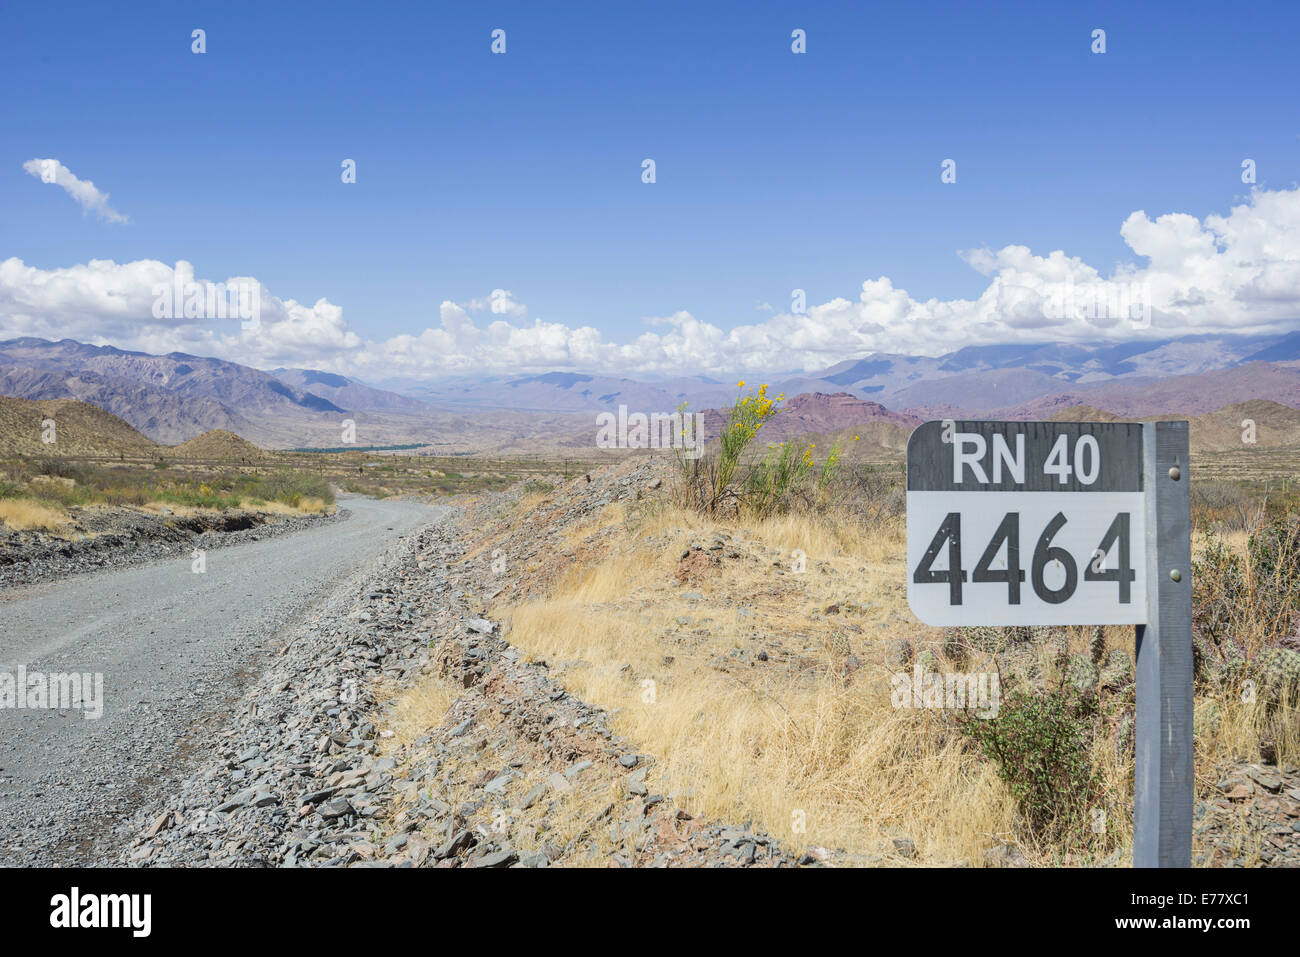 Sign with the road name on the Ruta Nacional 40, Ruta 40 or RN40 with kilometer marker, near Salta, Argentina Stock Photo